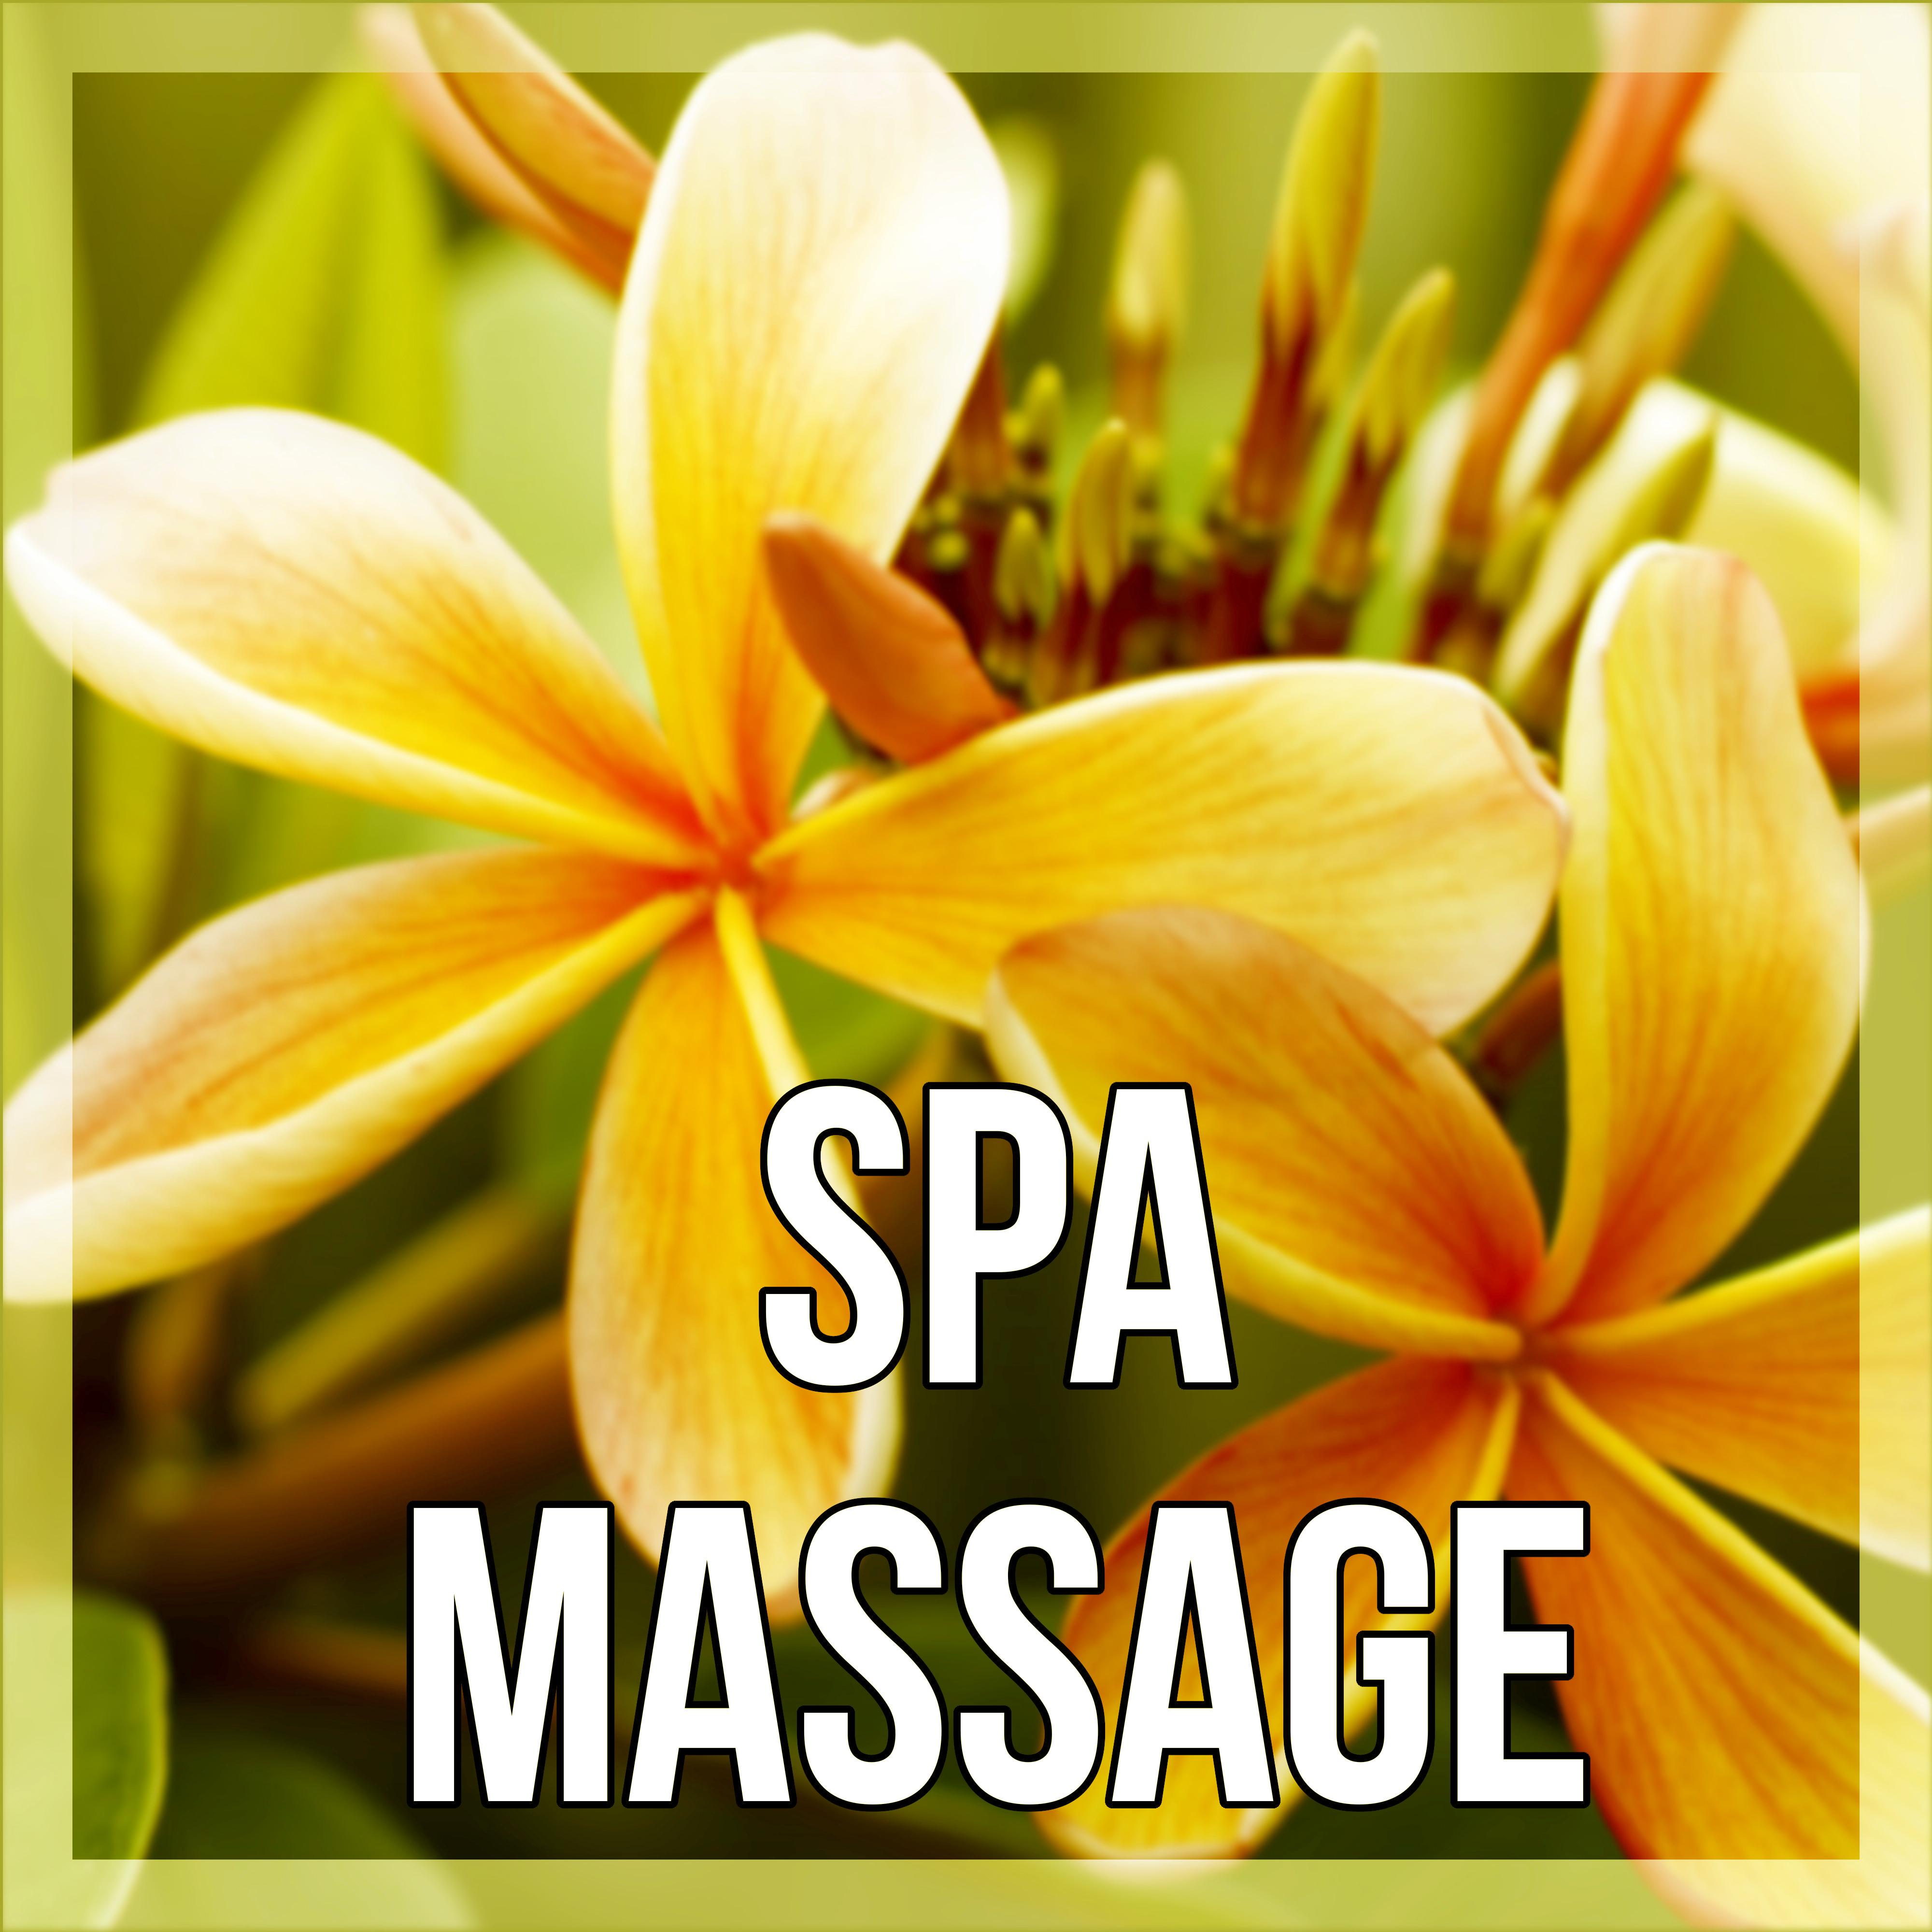 Spa Massage  Spa Sounds, Nature Music, Soft Music, Relaxation, New Age, Calm Background Music